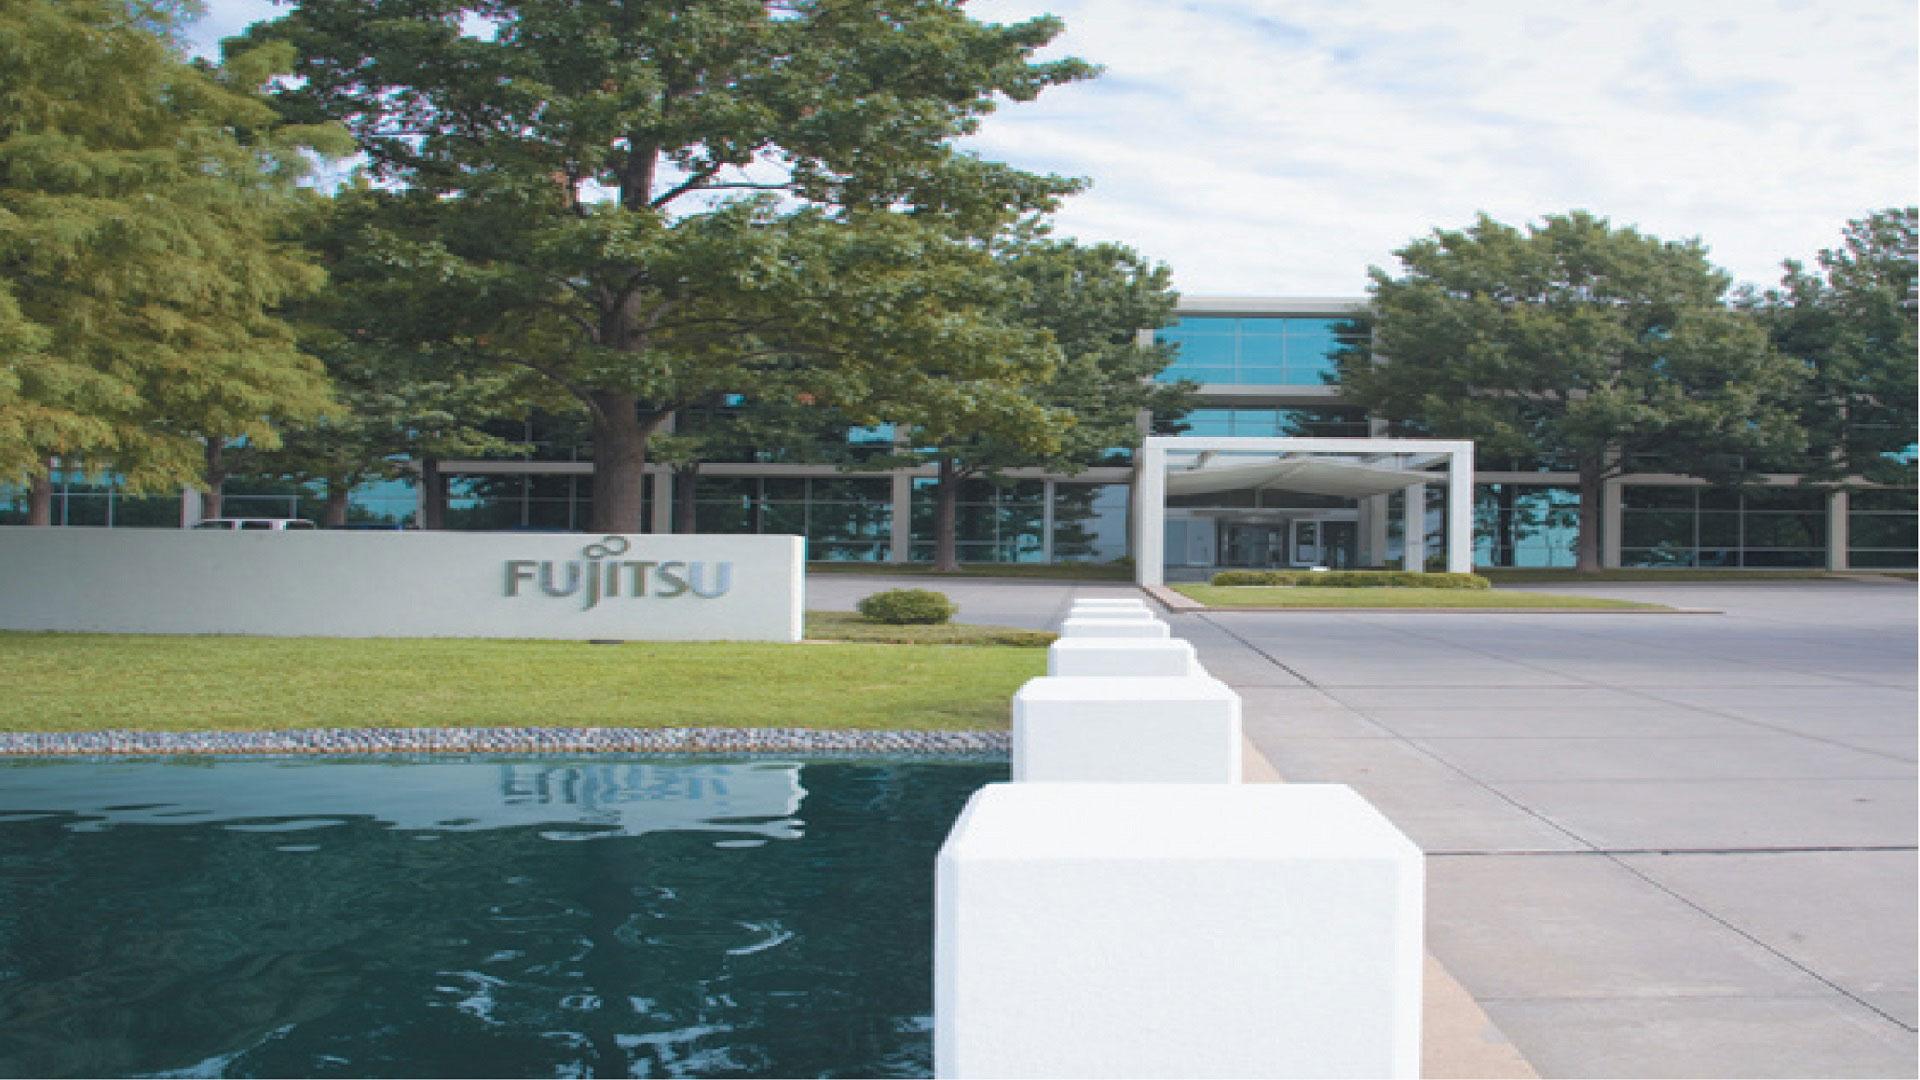 Streamlining Product Development and Testing: Fujitsu's Journey with Dassault Systèmes - Dassault Systemes Industrial IoT Case Study